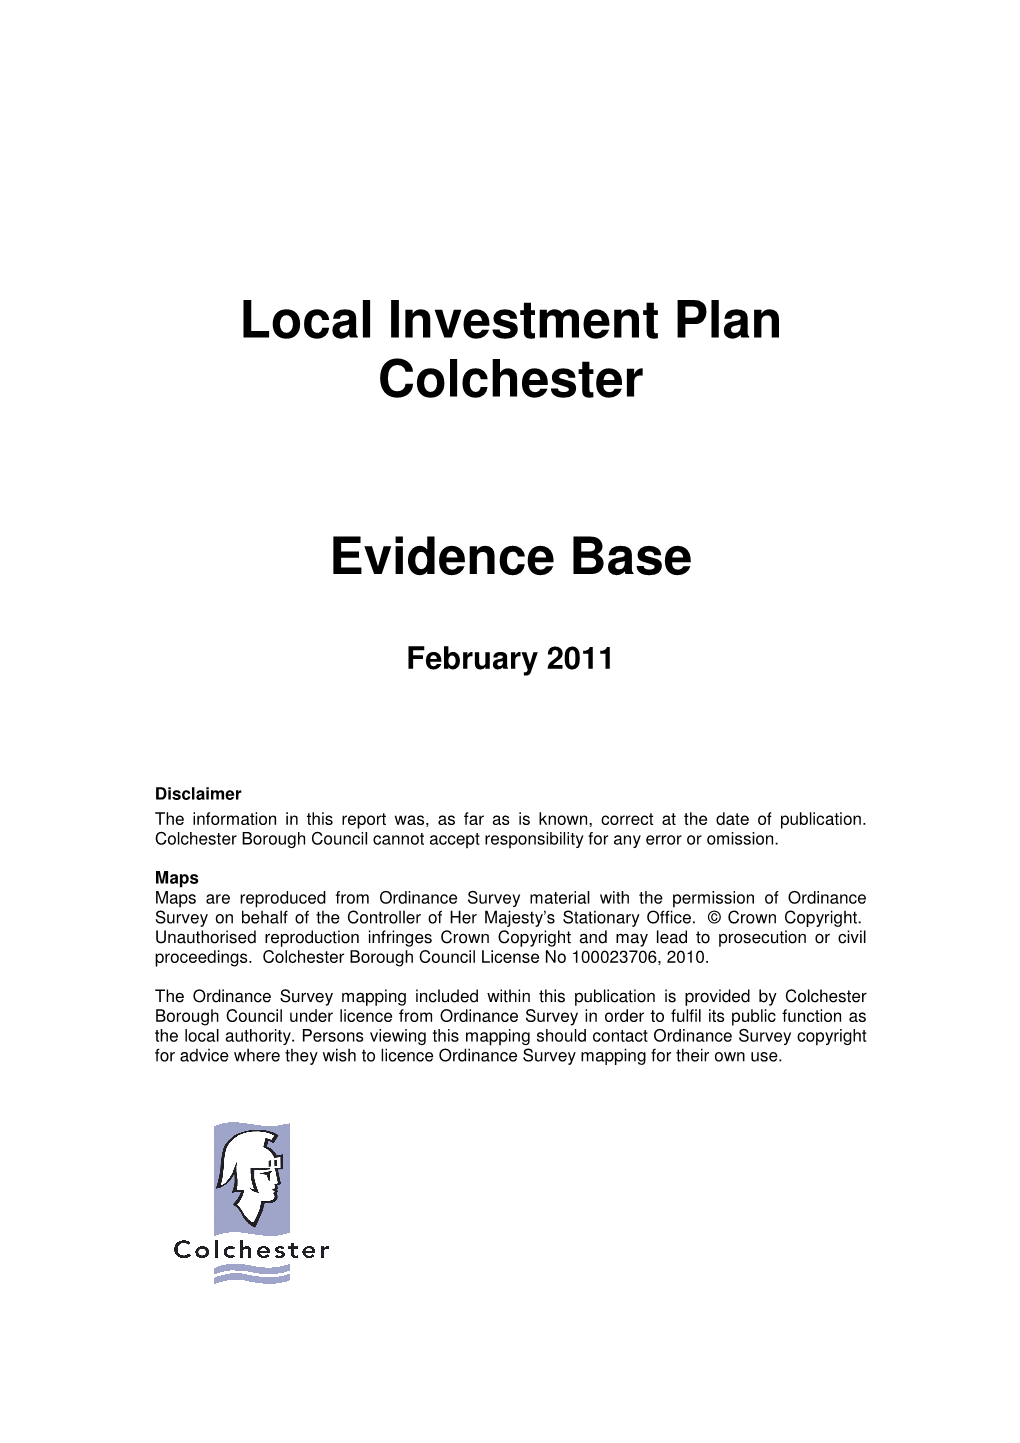 Local Investment Plan Colchester Evidence Base